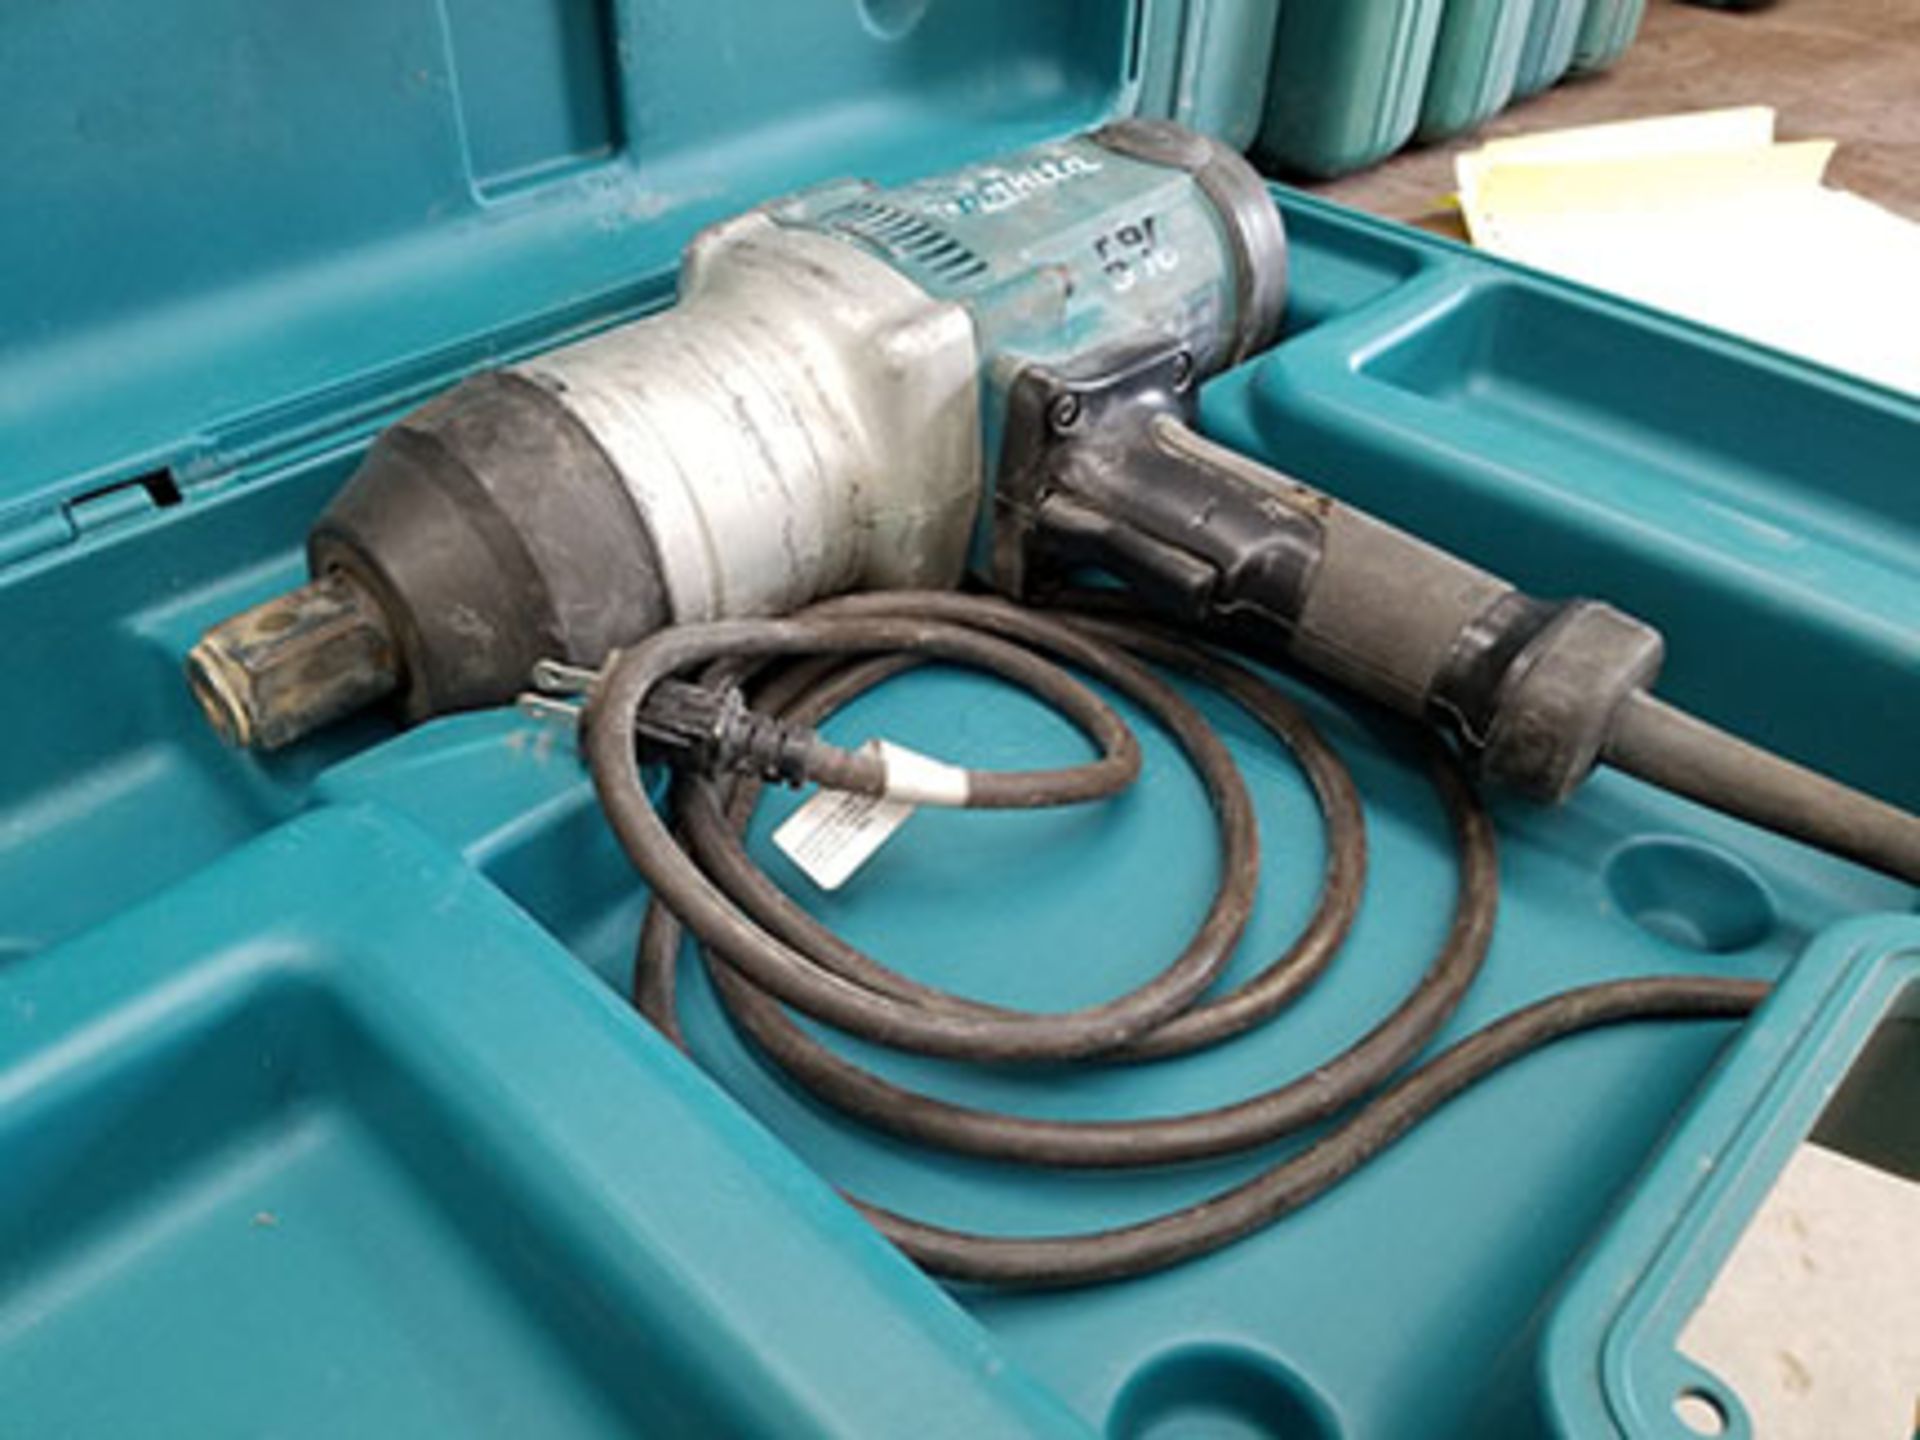 MAKITA TW1000 120V ELECTRIC IMPACT WRENCH, 1” DRIVE - Image 3 of 4